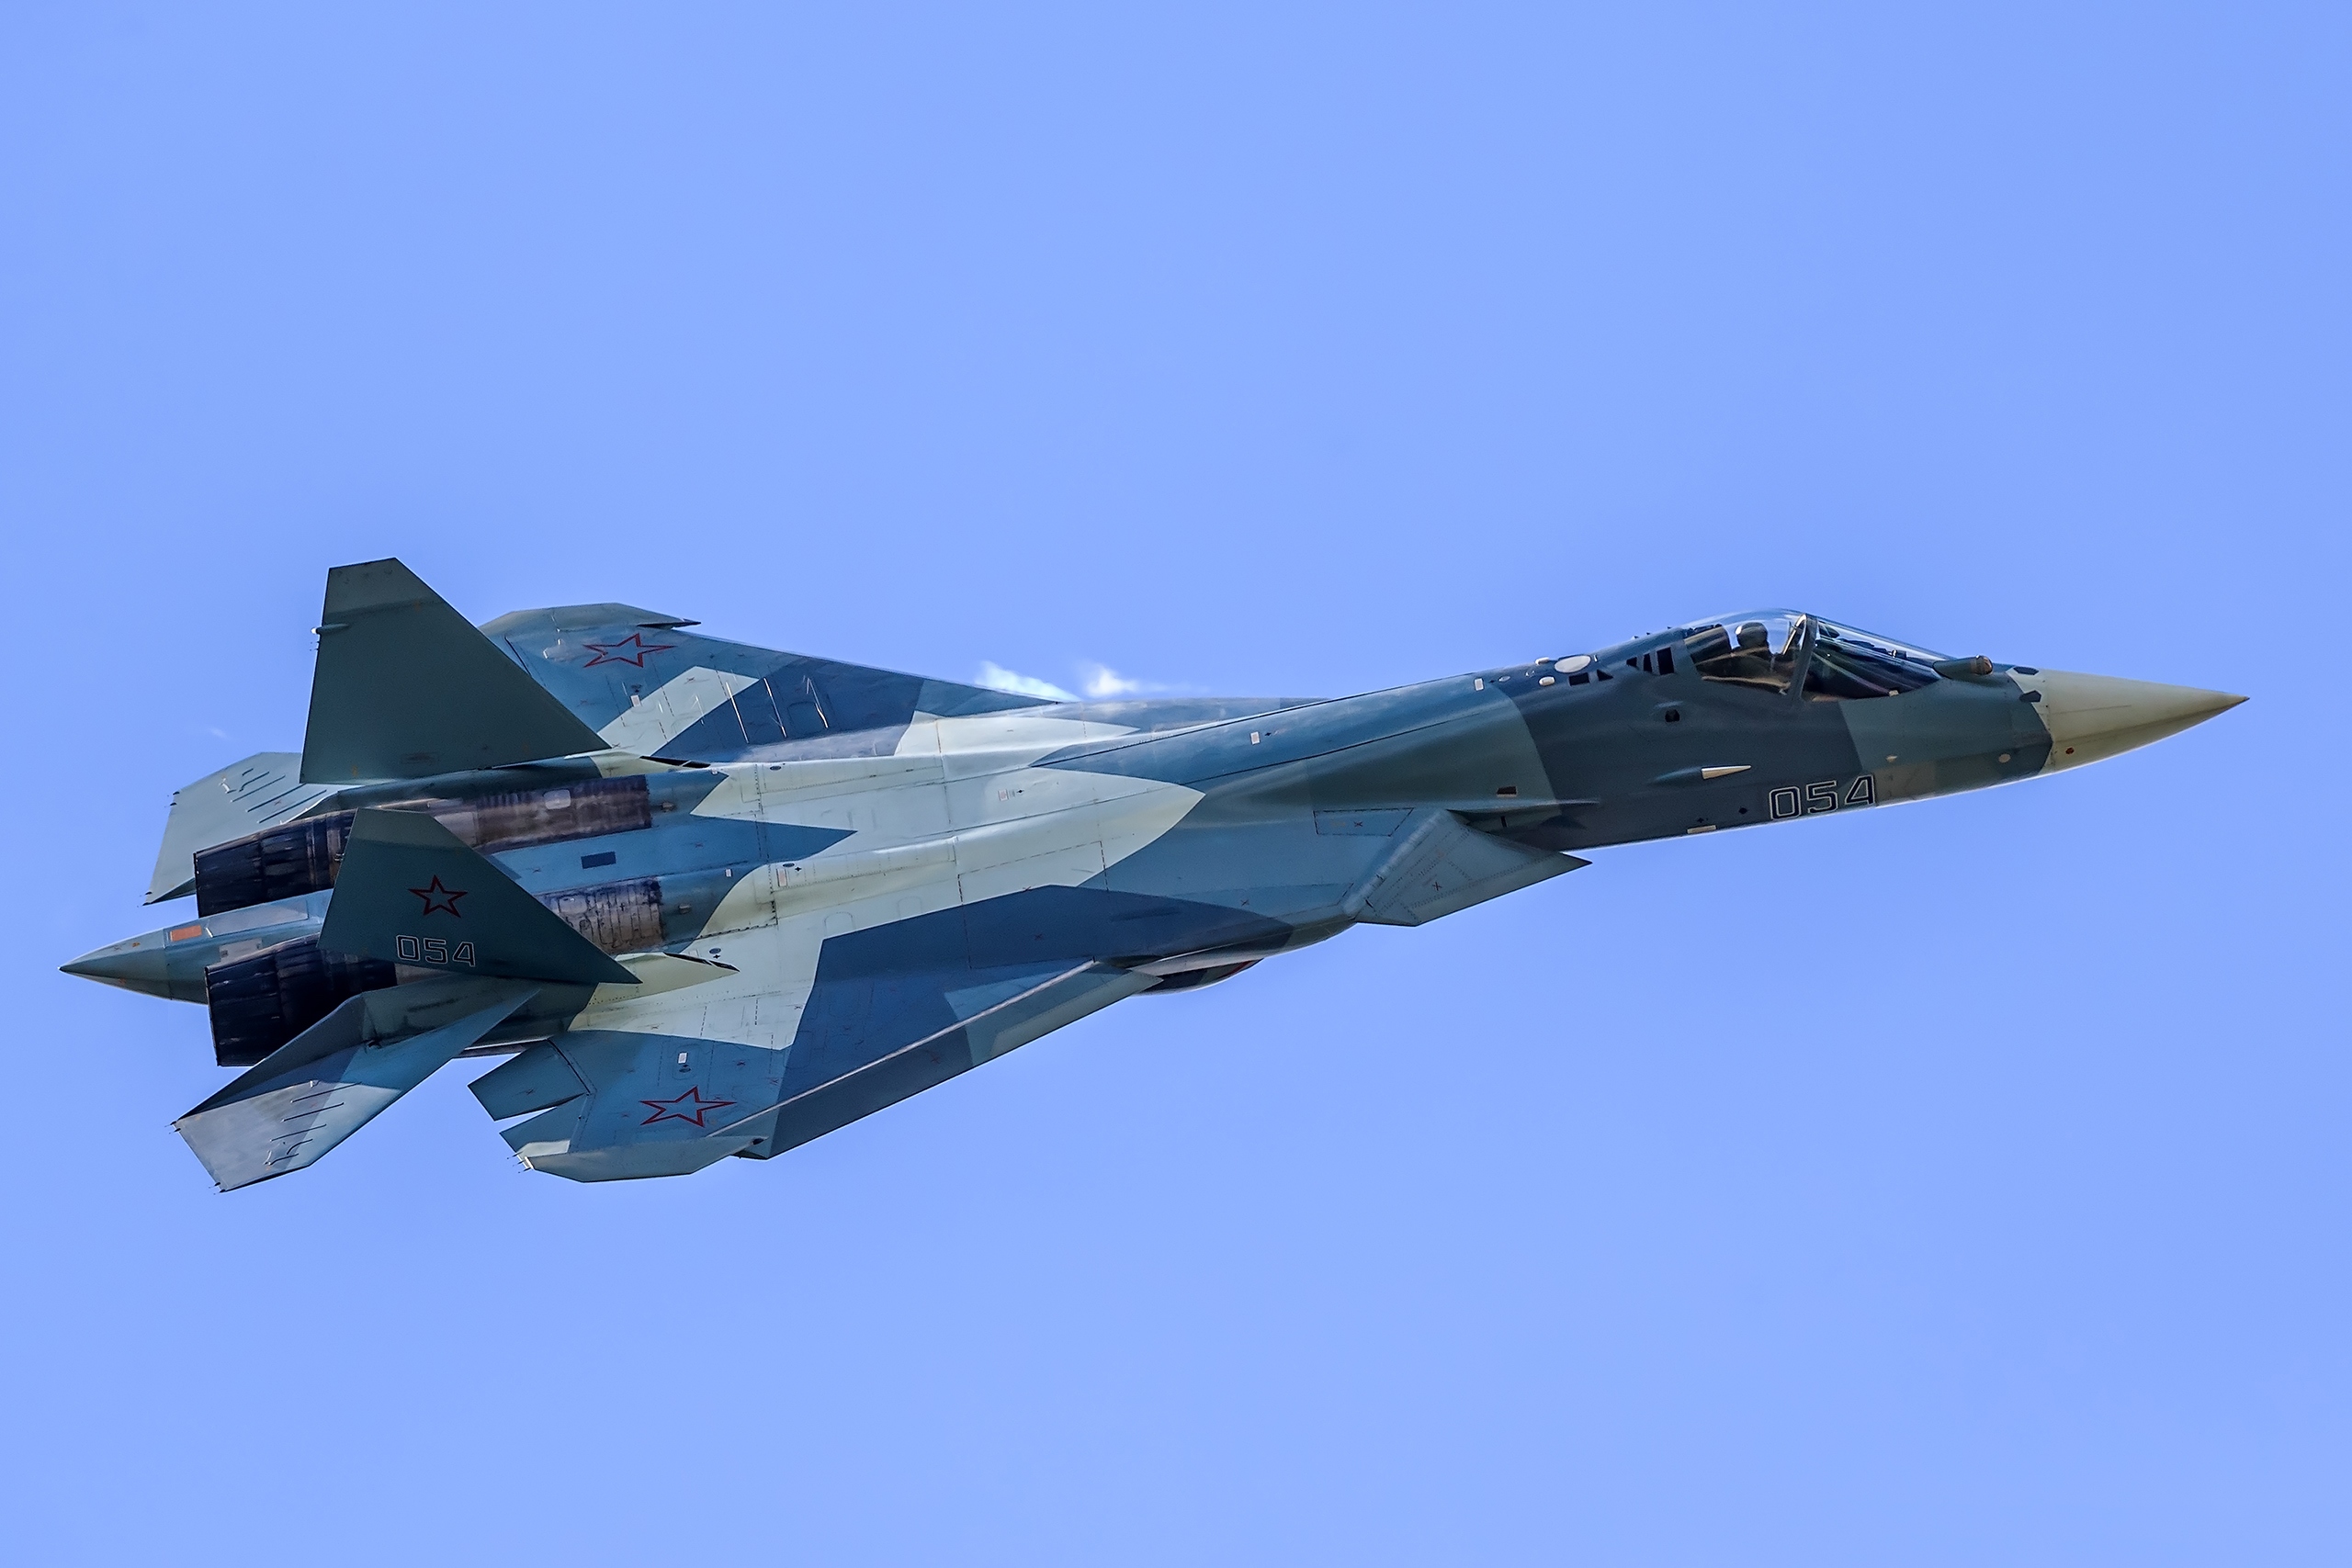 13 Photos of the Su57 Russias Stealthy Response to the F22 Raptor